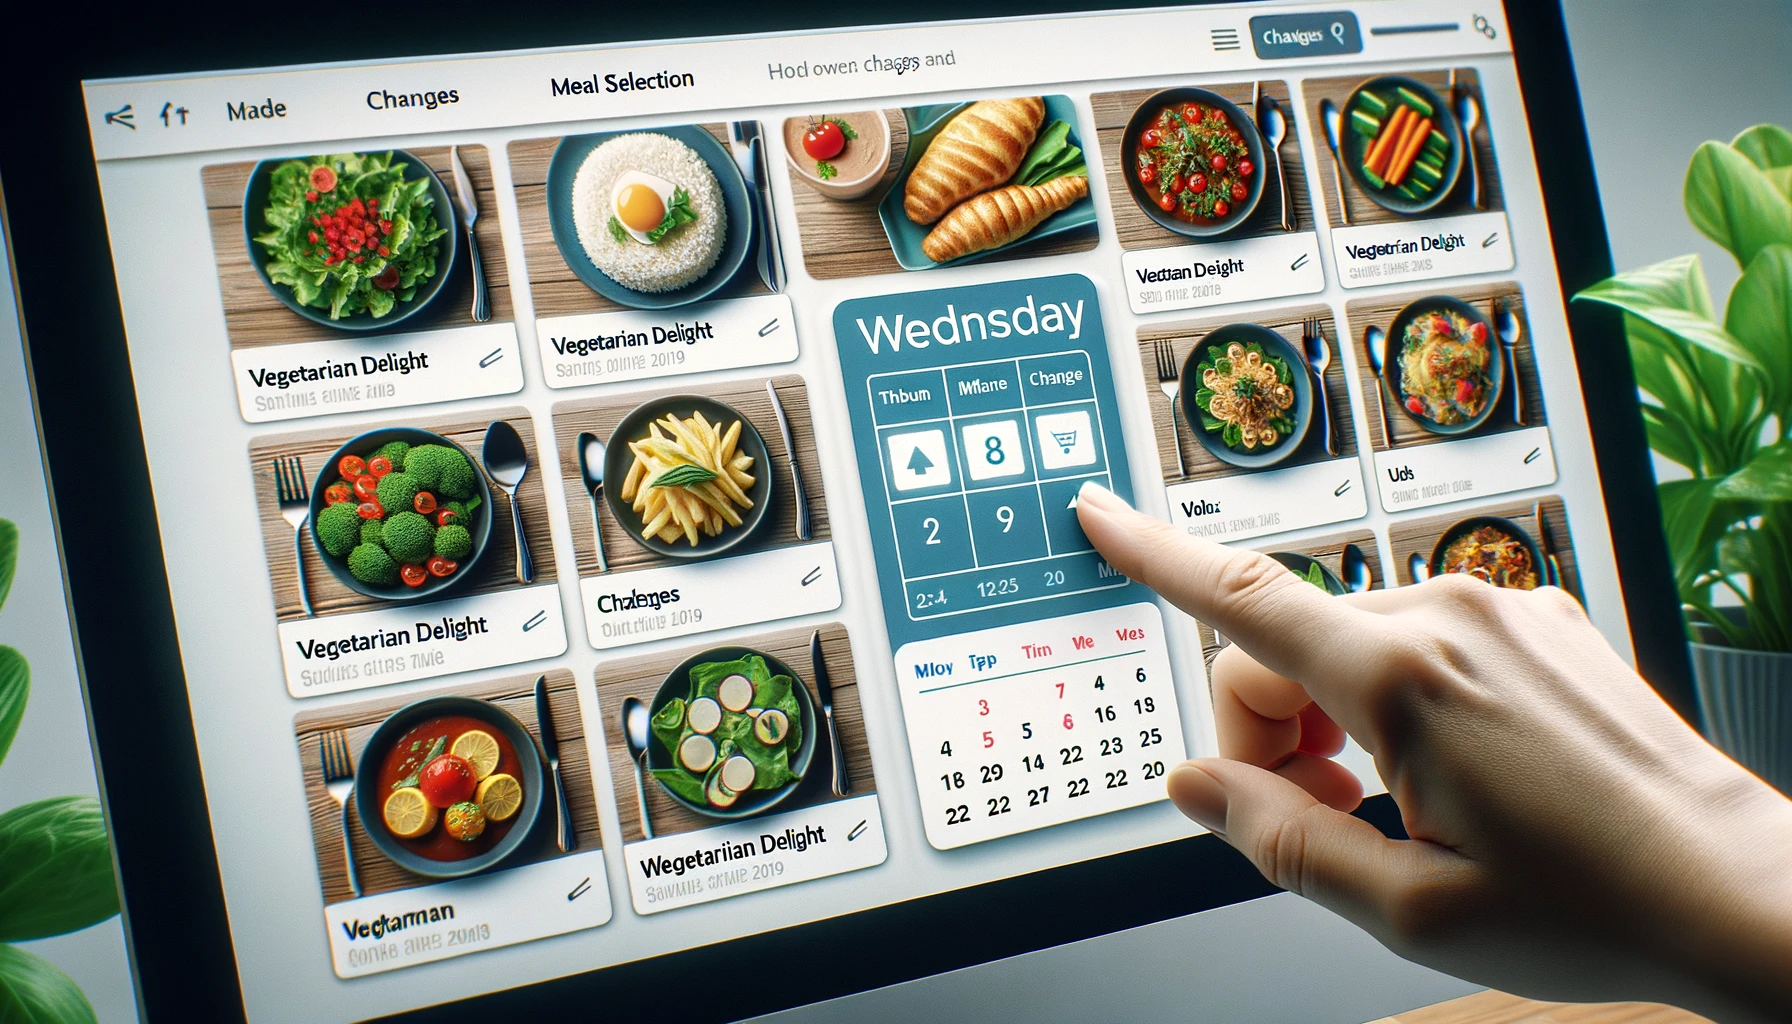 Computer screen displaying a meal selection interface with dishes and a calendar widget.